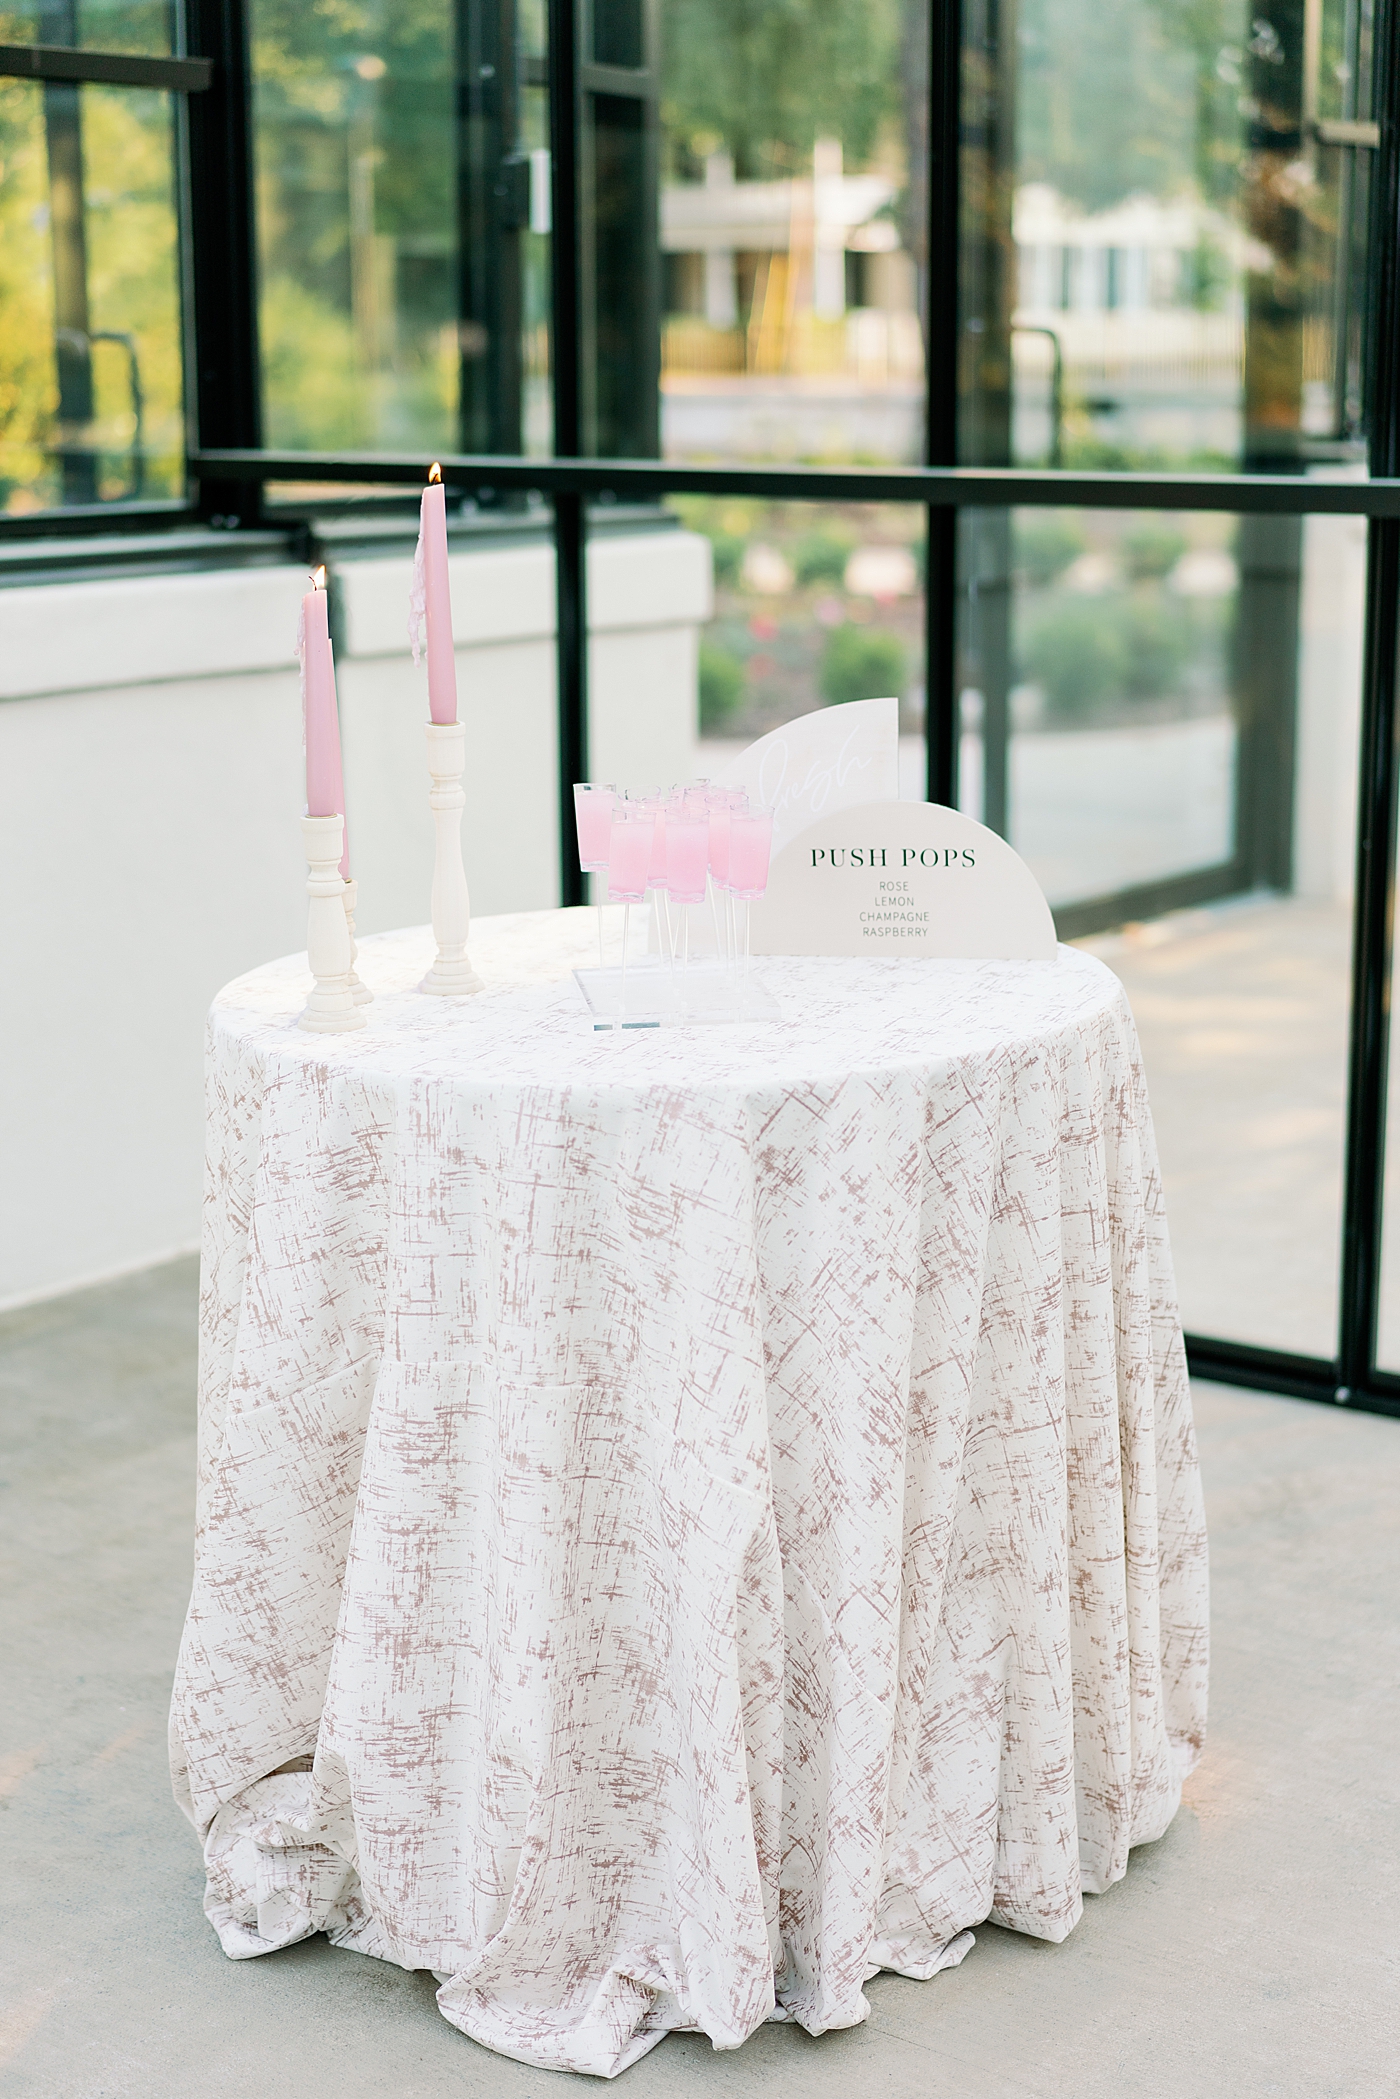 Custom push pops on a table during summer inspired garden wedding | Photo by Annie Laura Photo